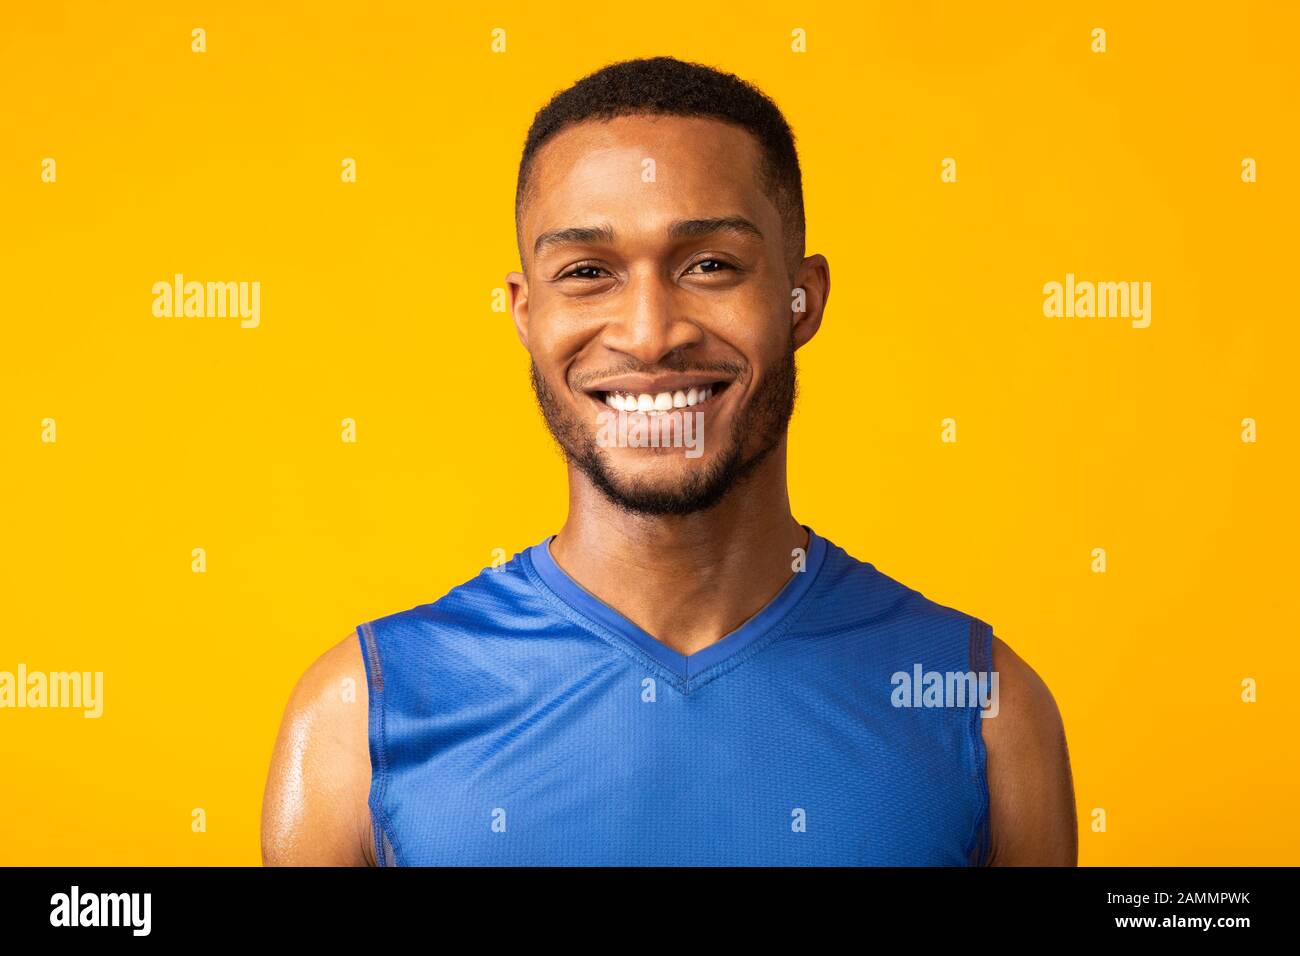 Front view portrait of smiling happy afro sportsman Stock Photo